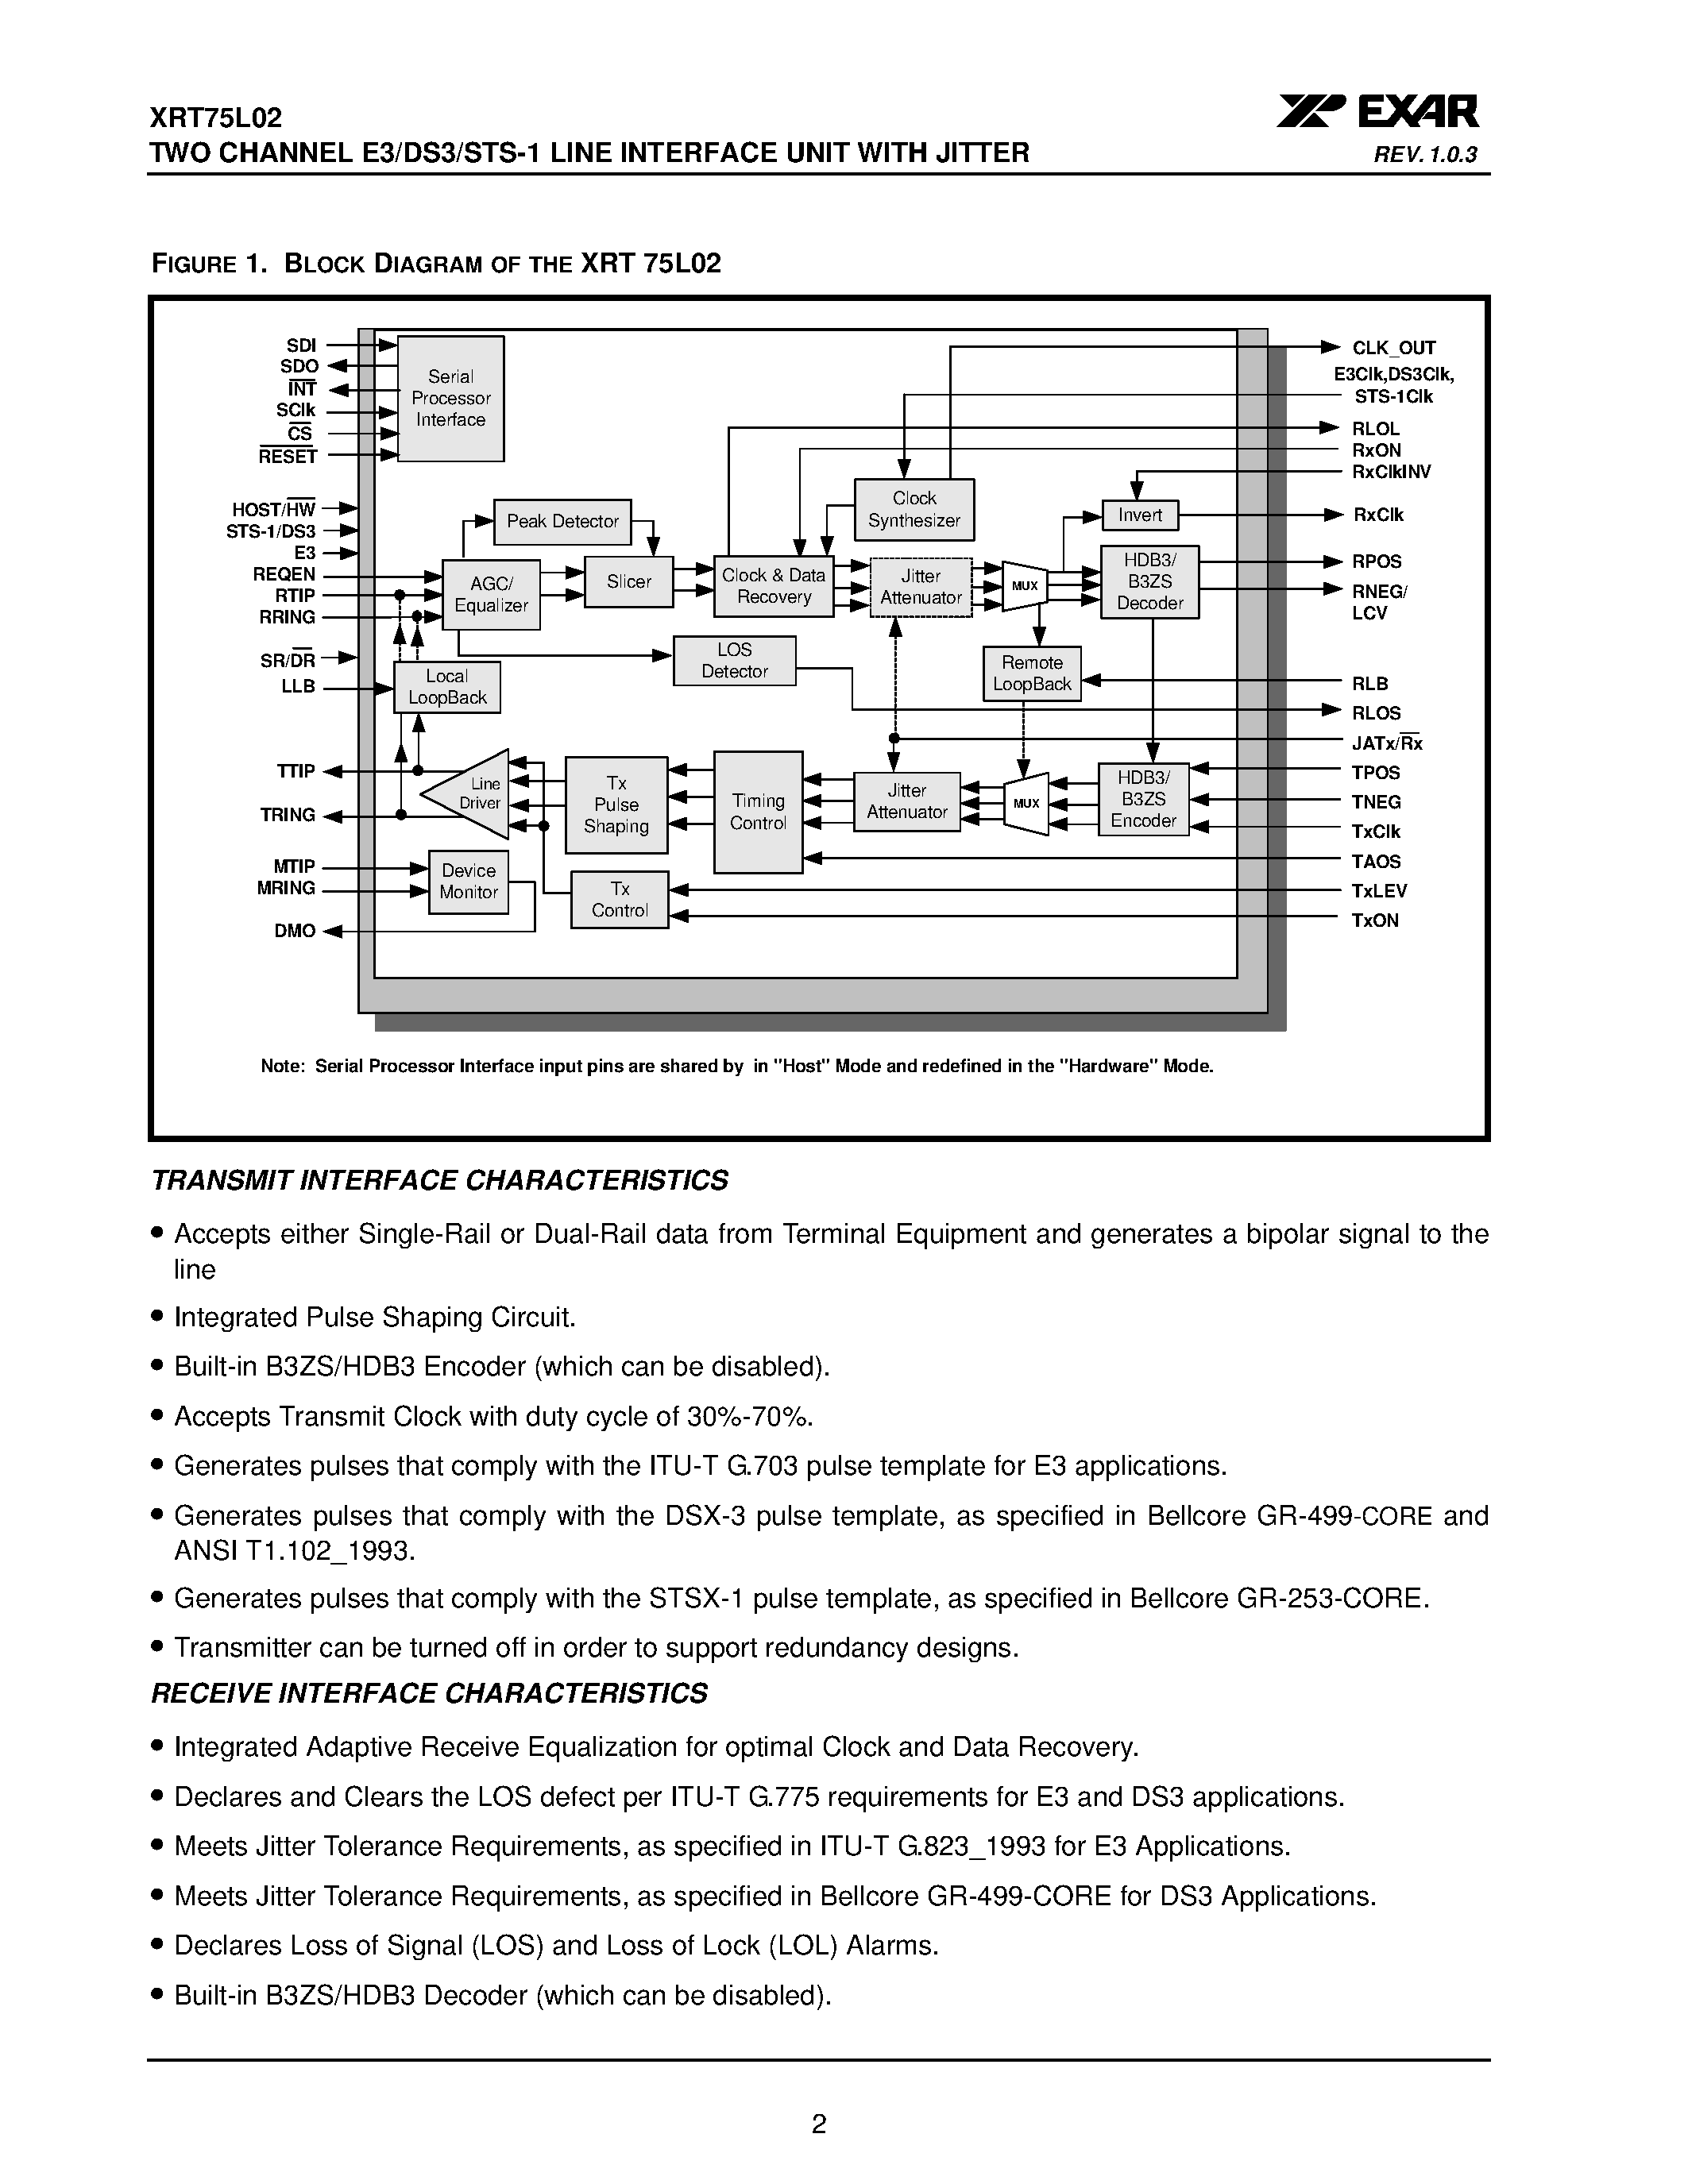 Datasheet XRT75L02 - TWO CHANNEL E3/DS3/STS-1 LINE INTERFACE UNIT page 2